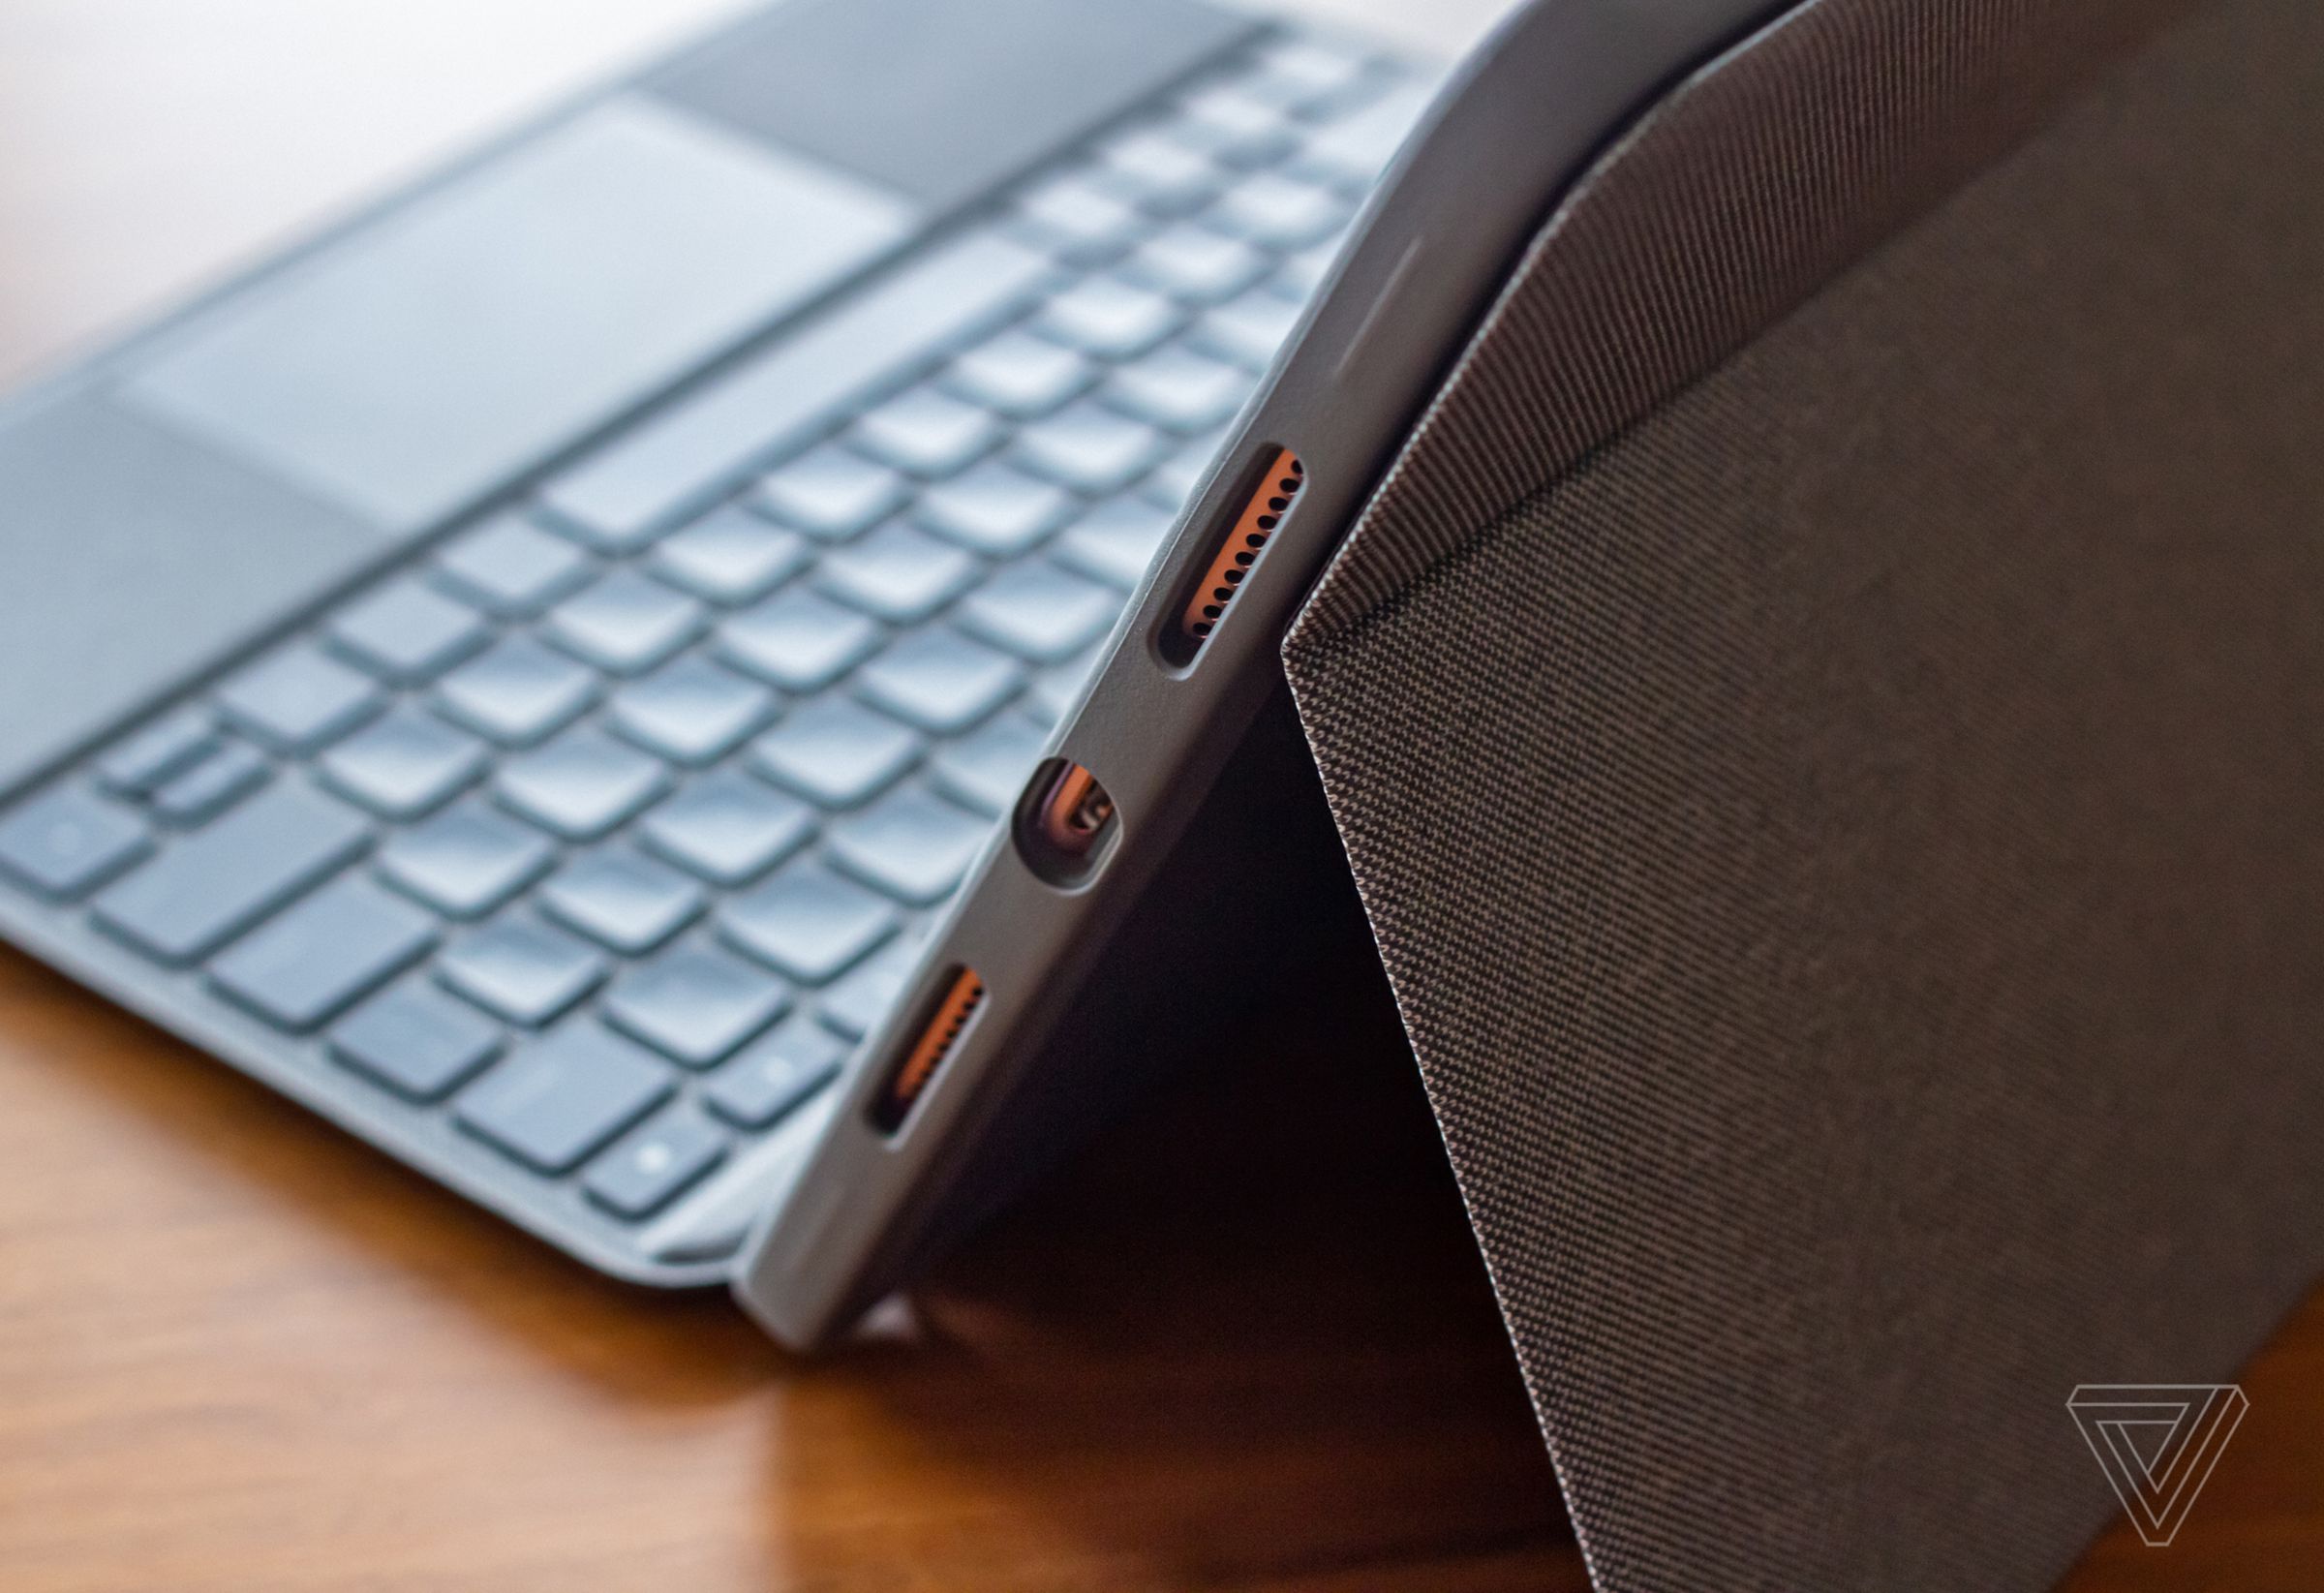 The Combo Touch case has cutouts for the iPad’s speakers and charging port.